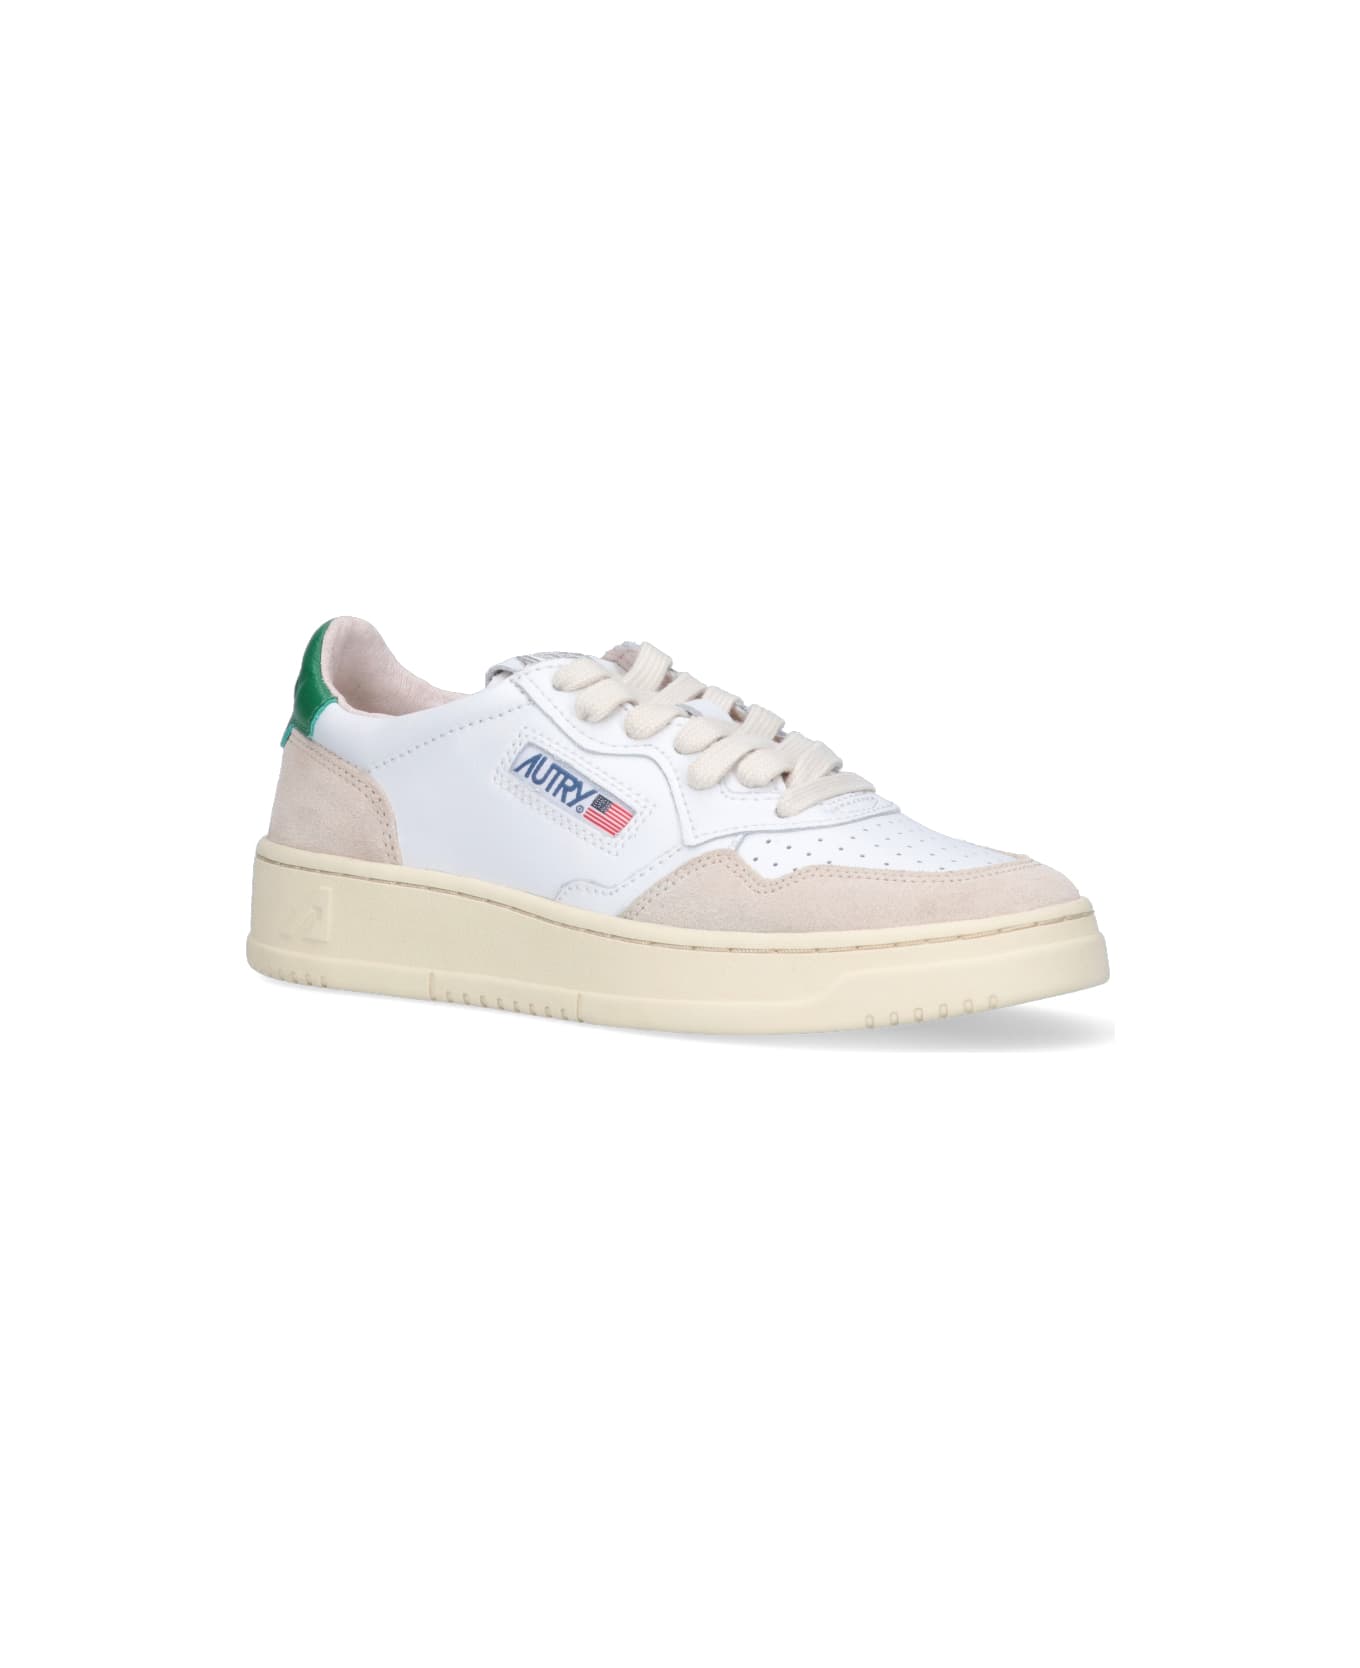 Autry "medalist 01" Low Sneakers - White スニーカー